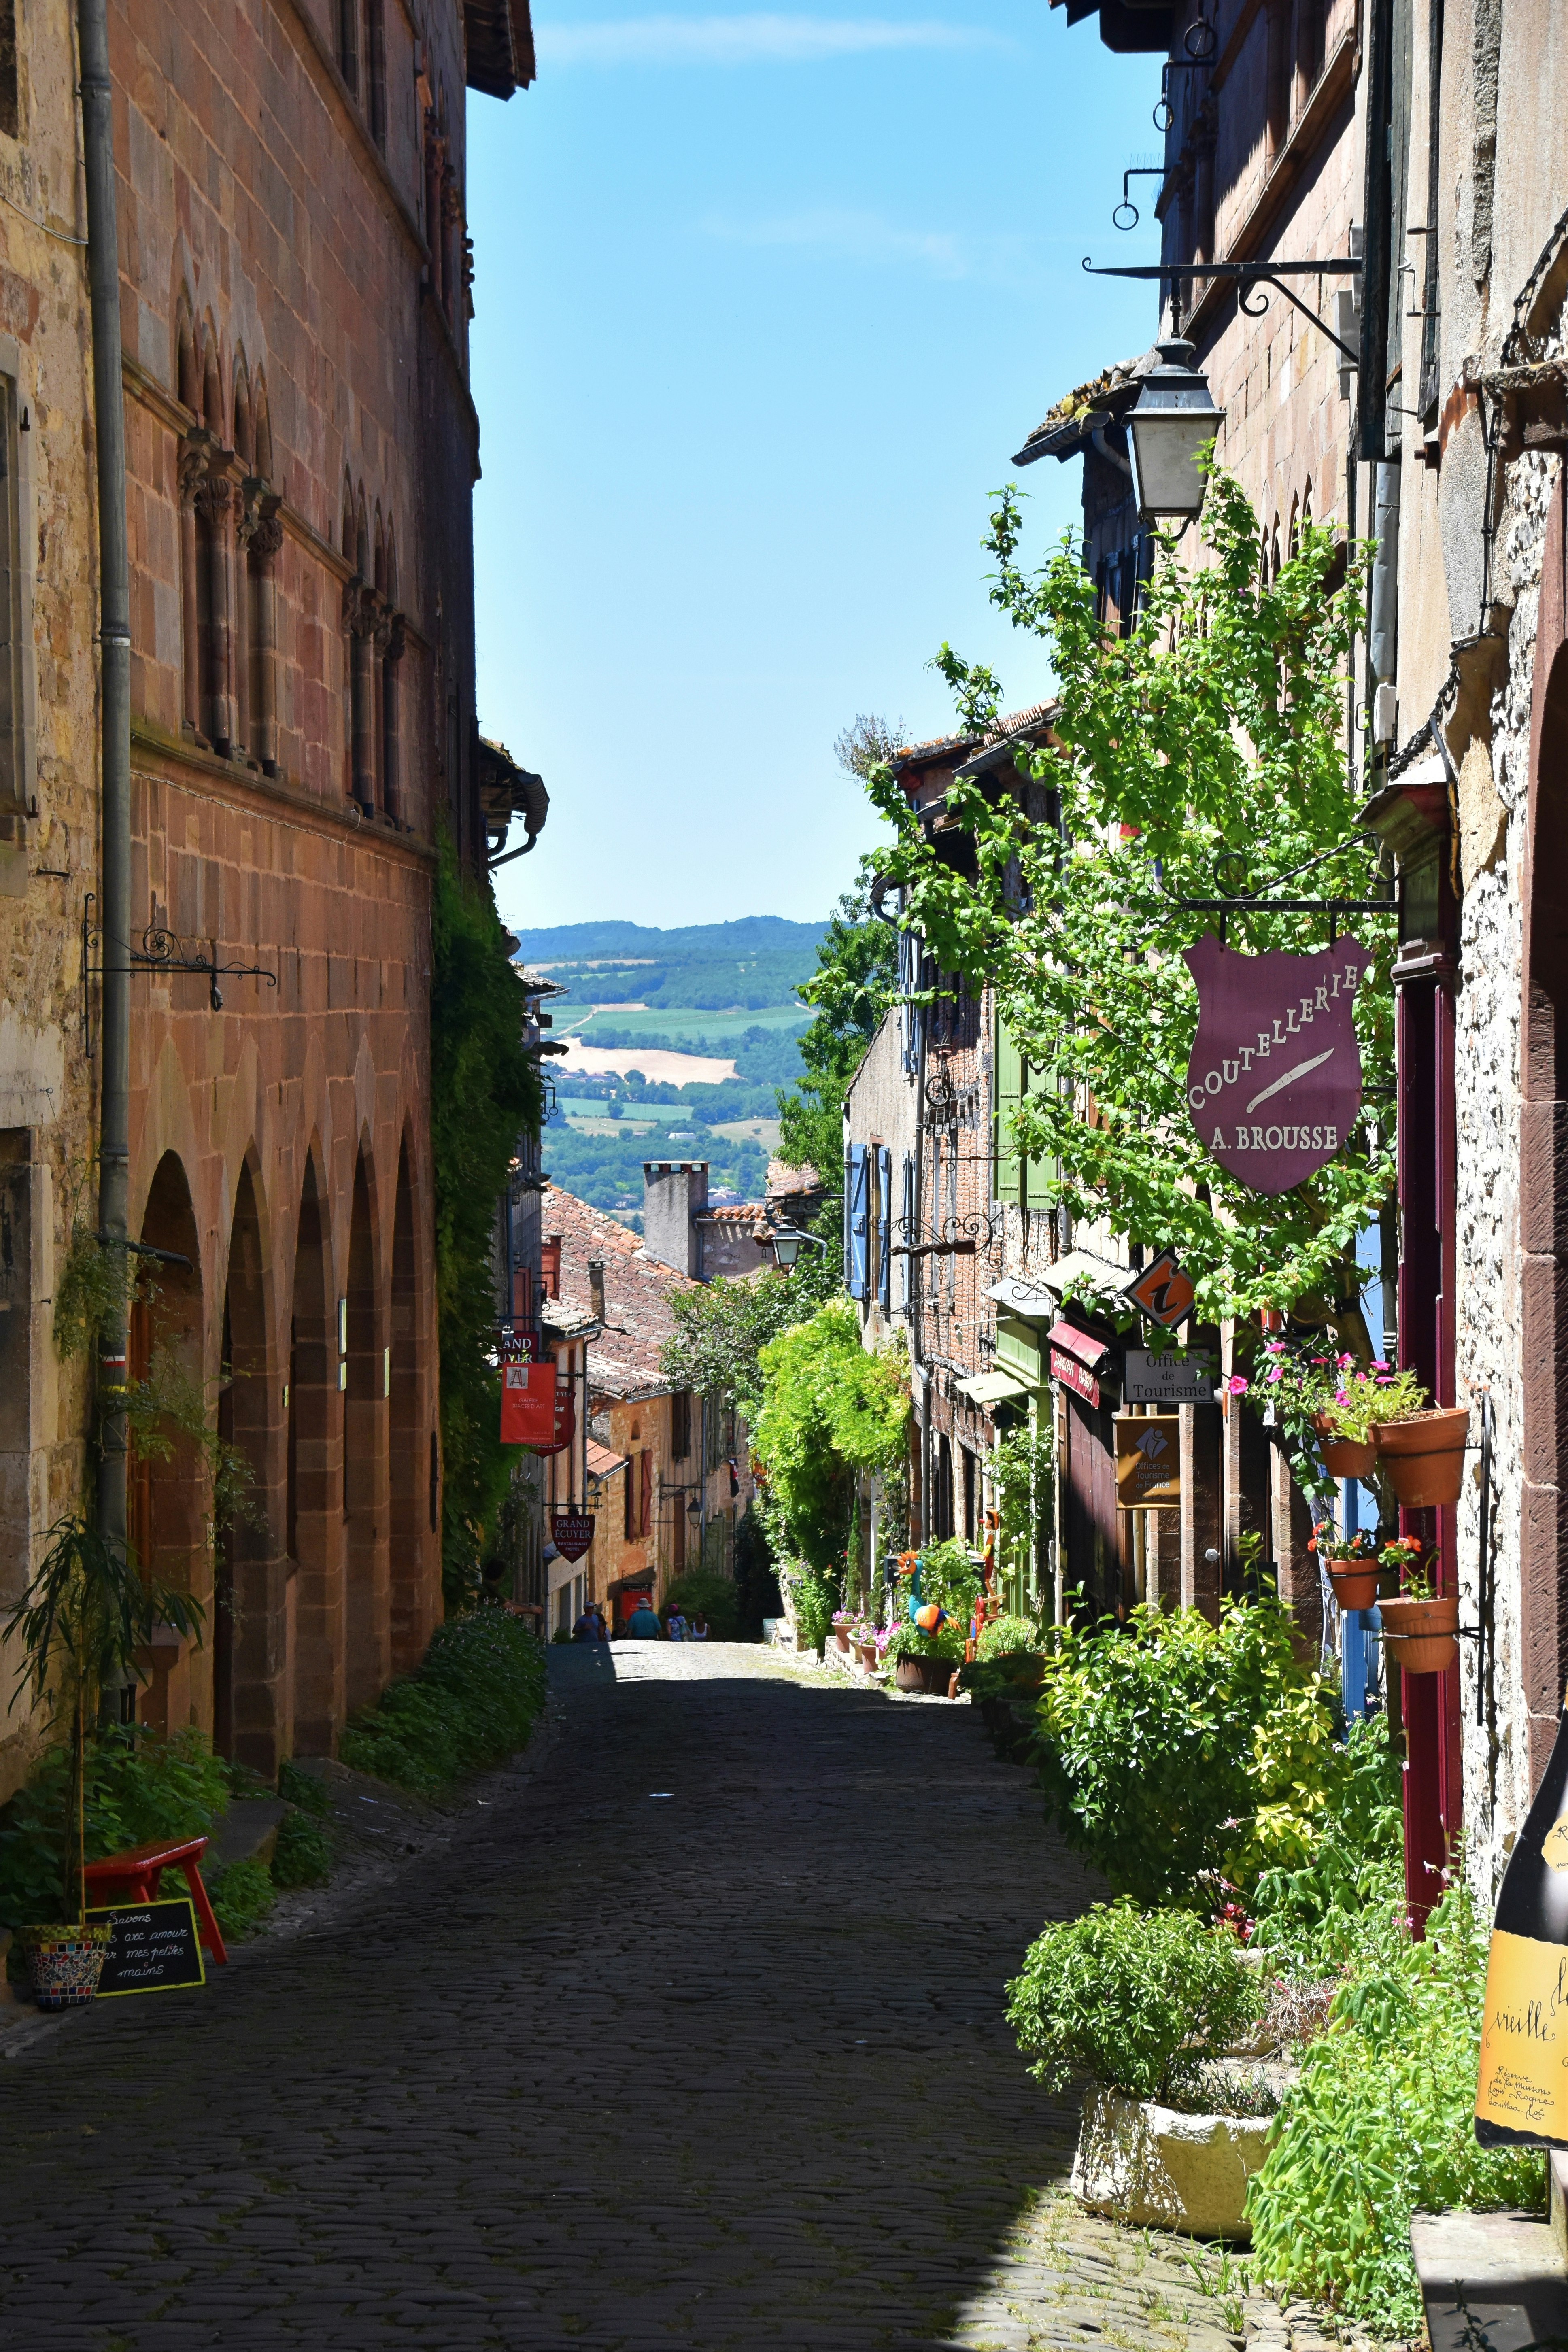 Cordes-sur-Ciel sits above the landscape in Southern France, with endless picturesque cobbled streets and outdoor markets. A beautiful area to explore, particularly on a lovely afternoon (when I took the photo).